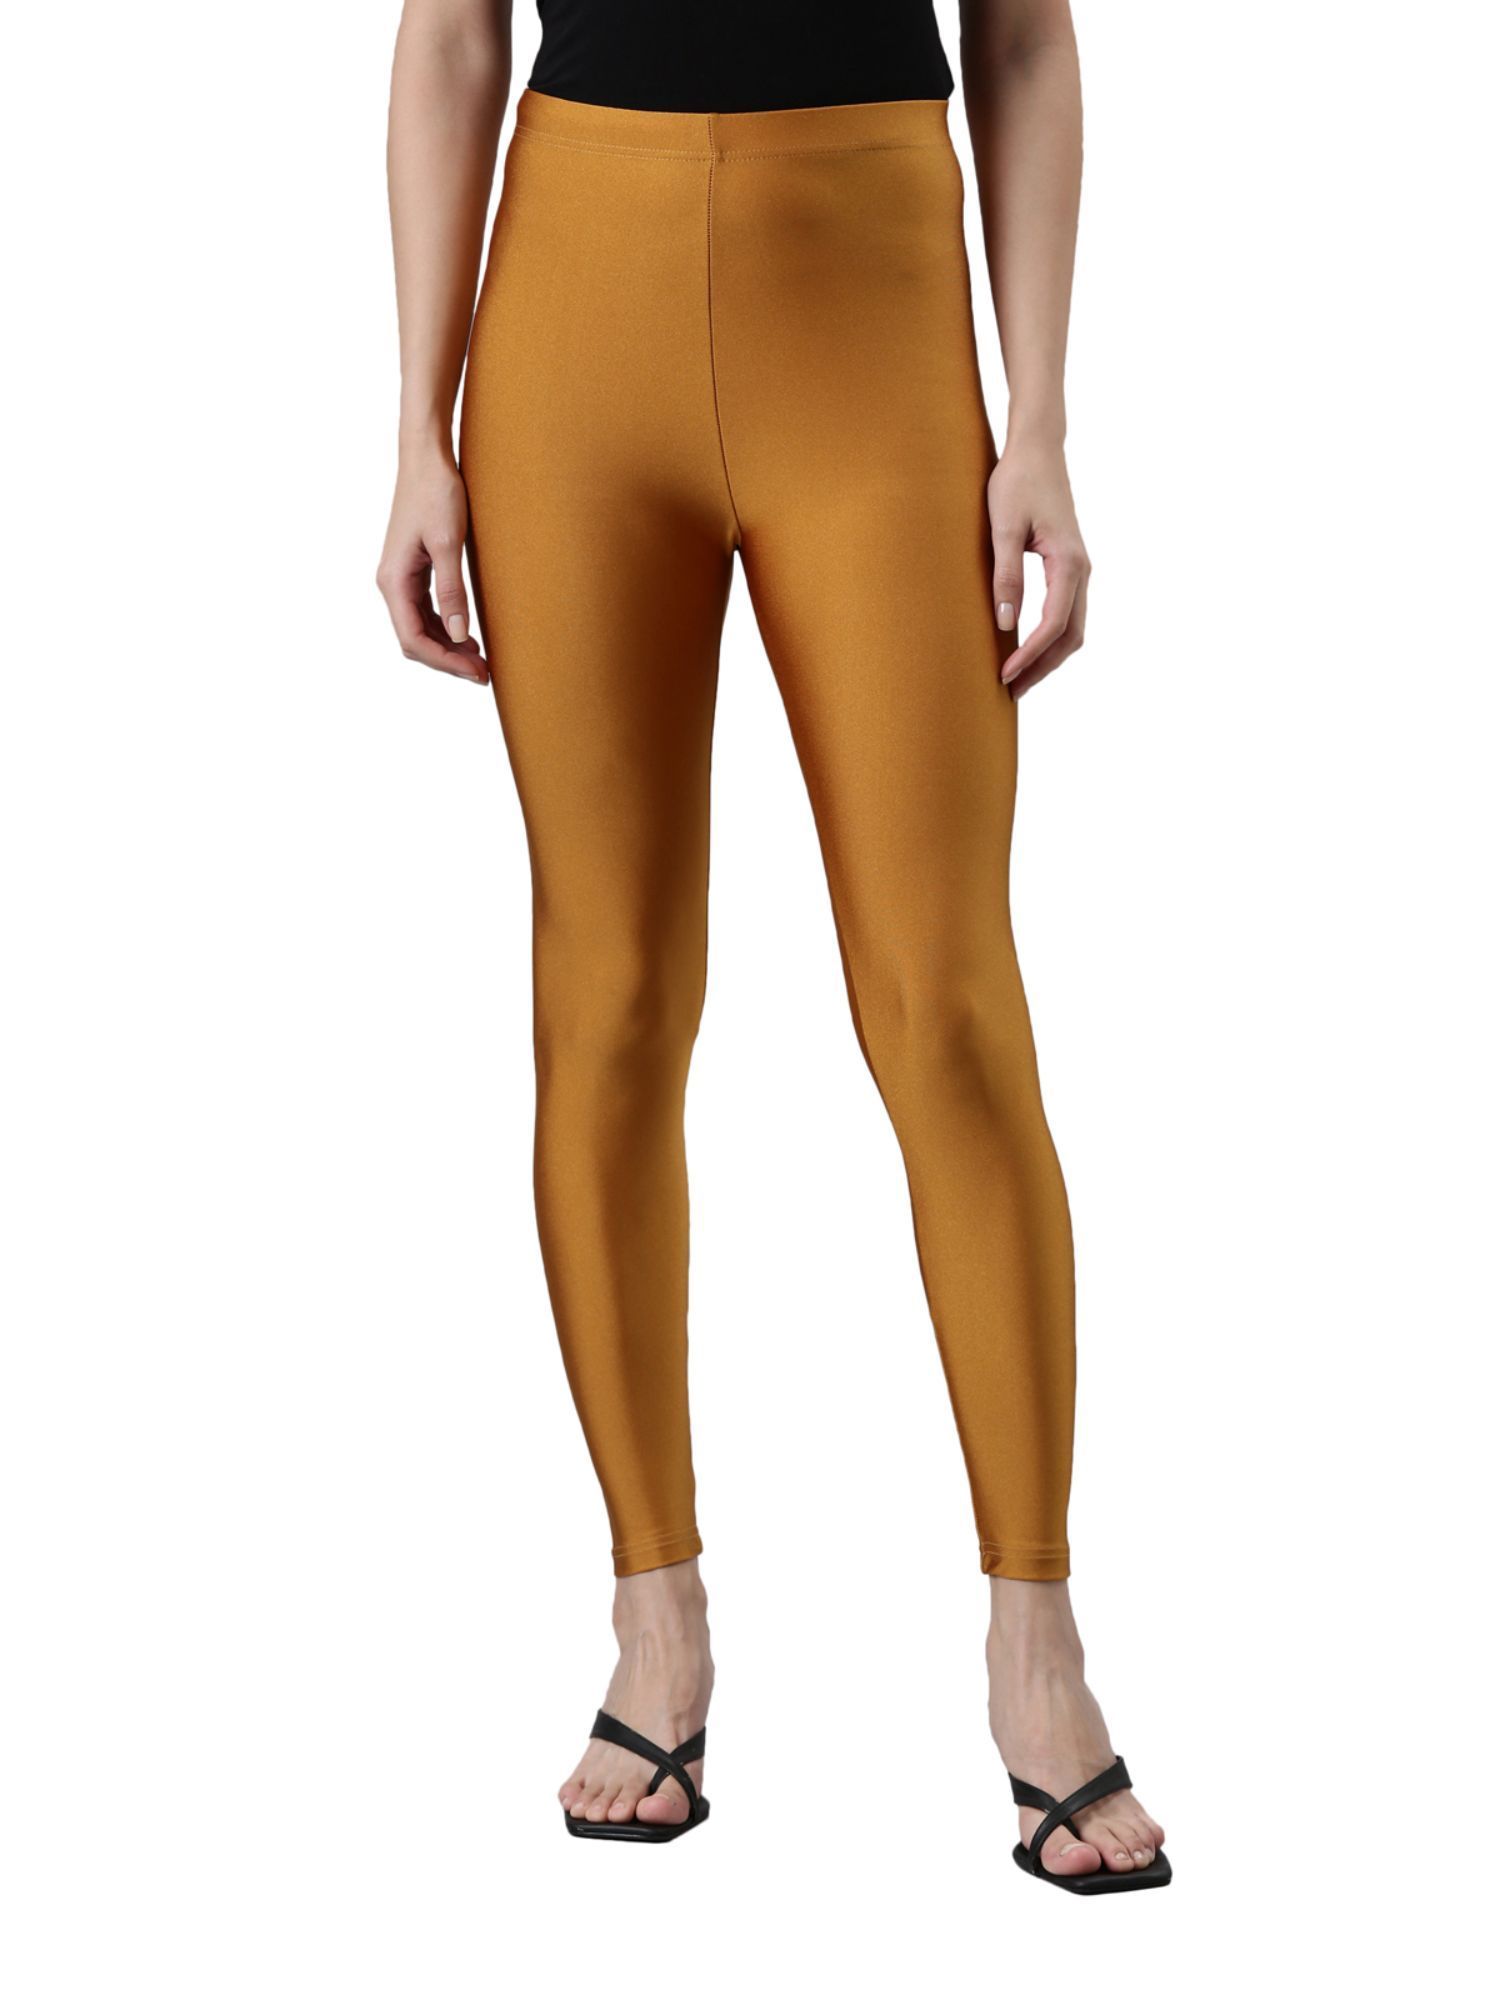 Buy Gold Leggings for Girls by Go Colors Online | Ajio.com